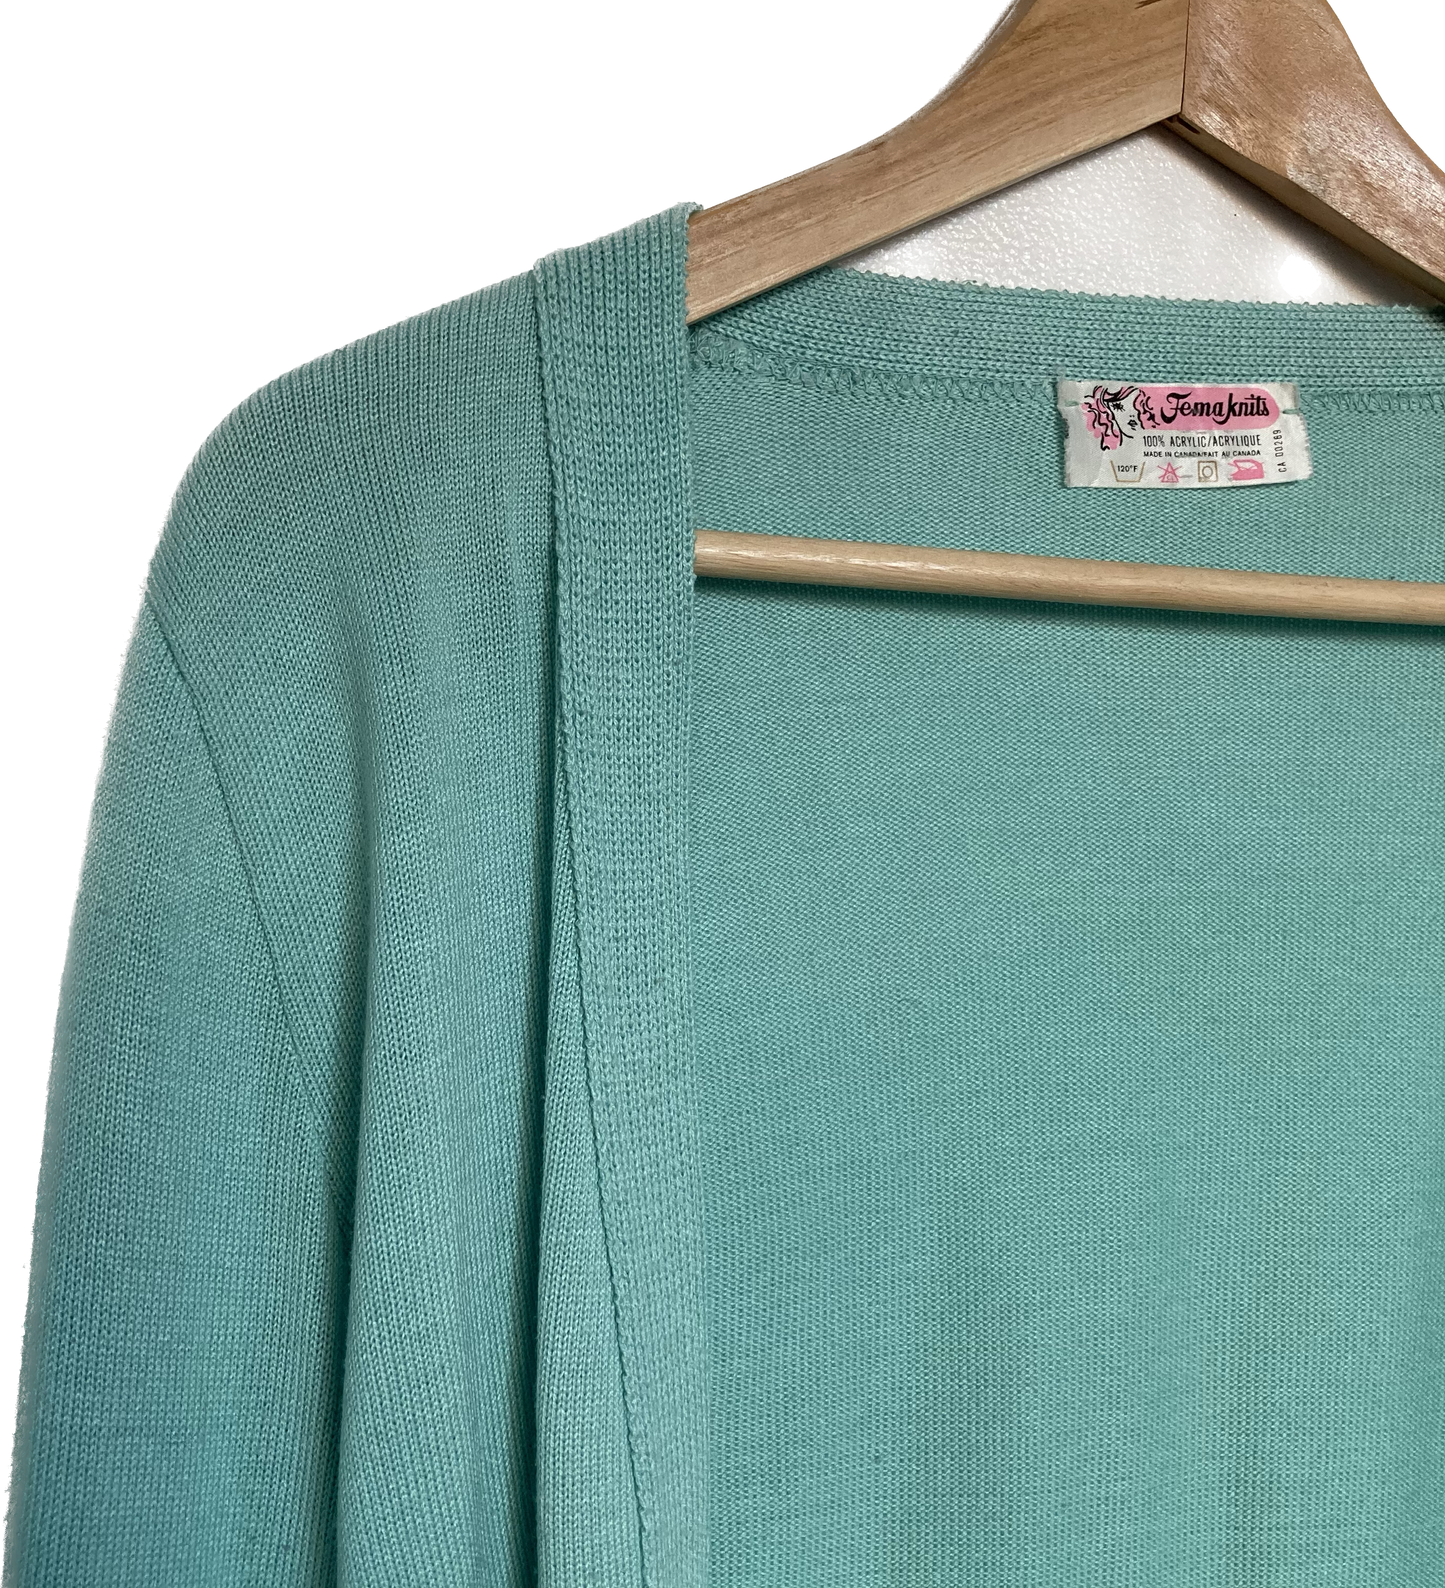 Vintage Turquoise Open Cardigan Sweater